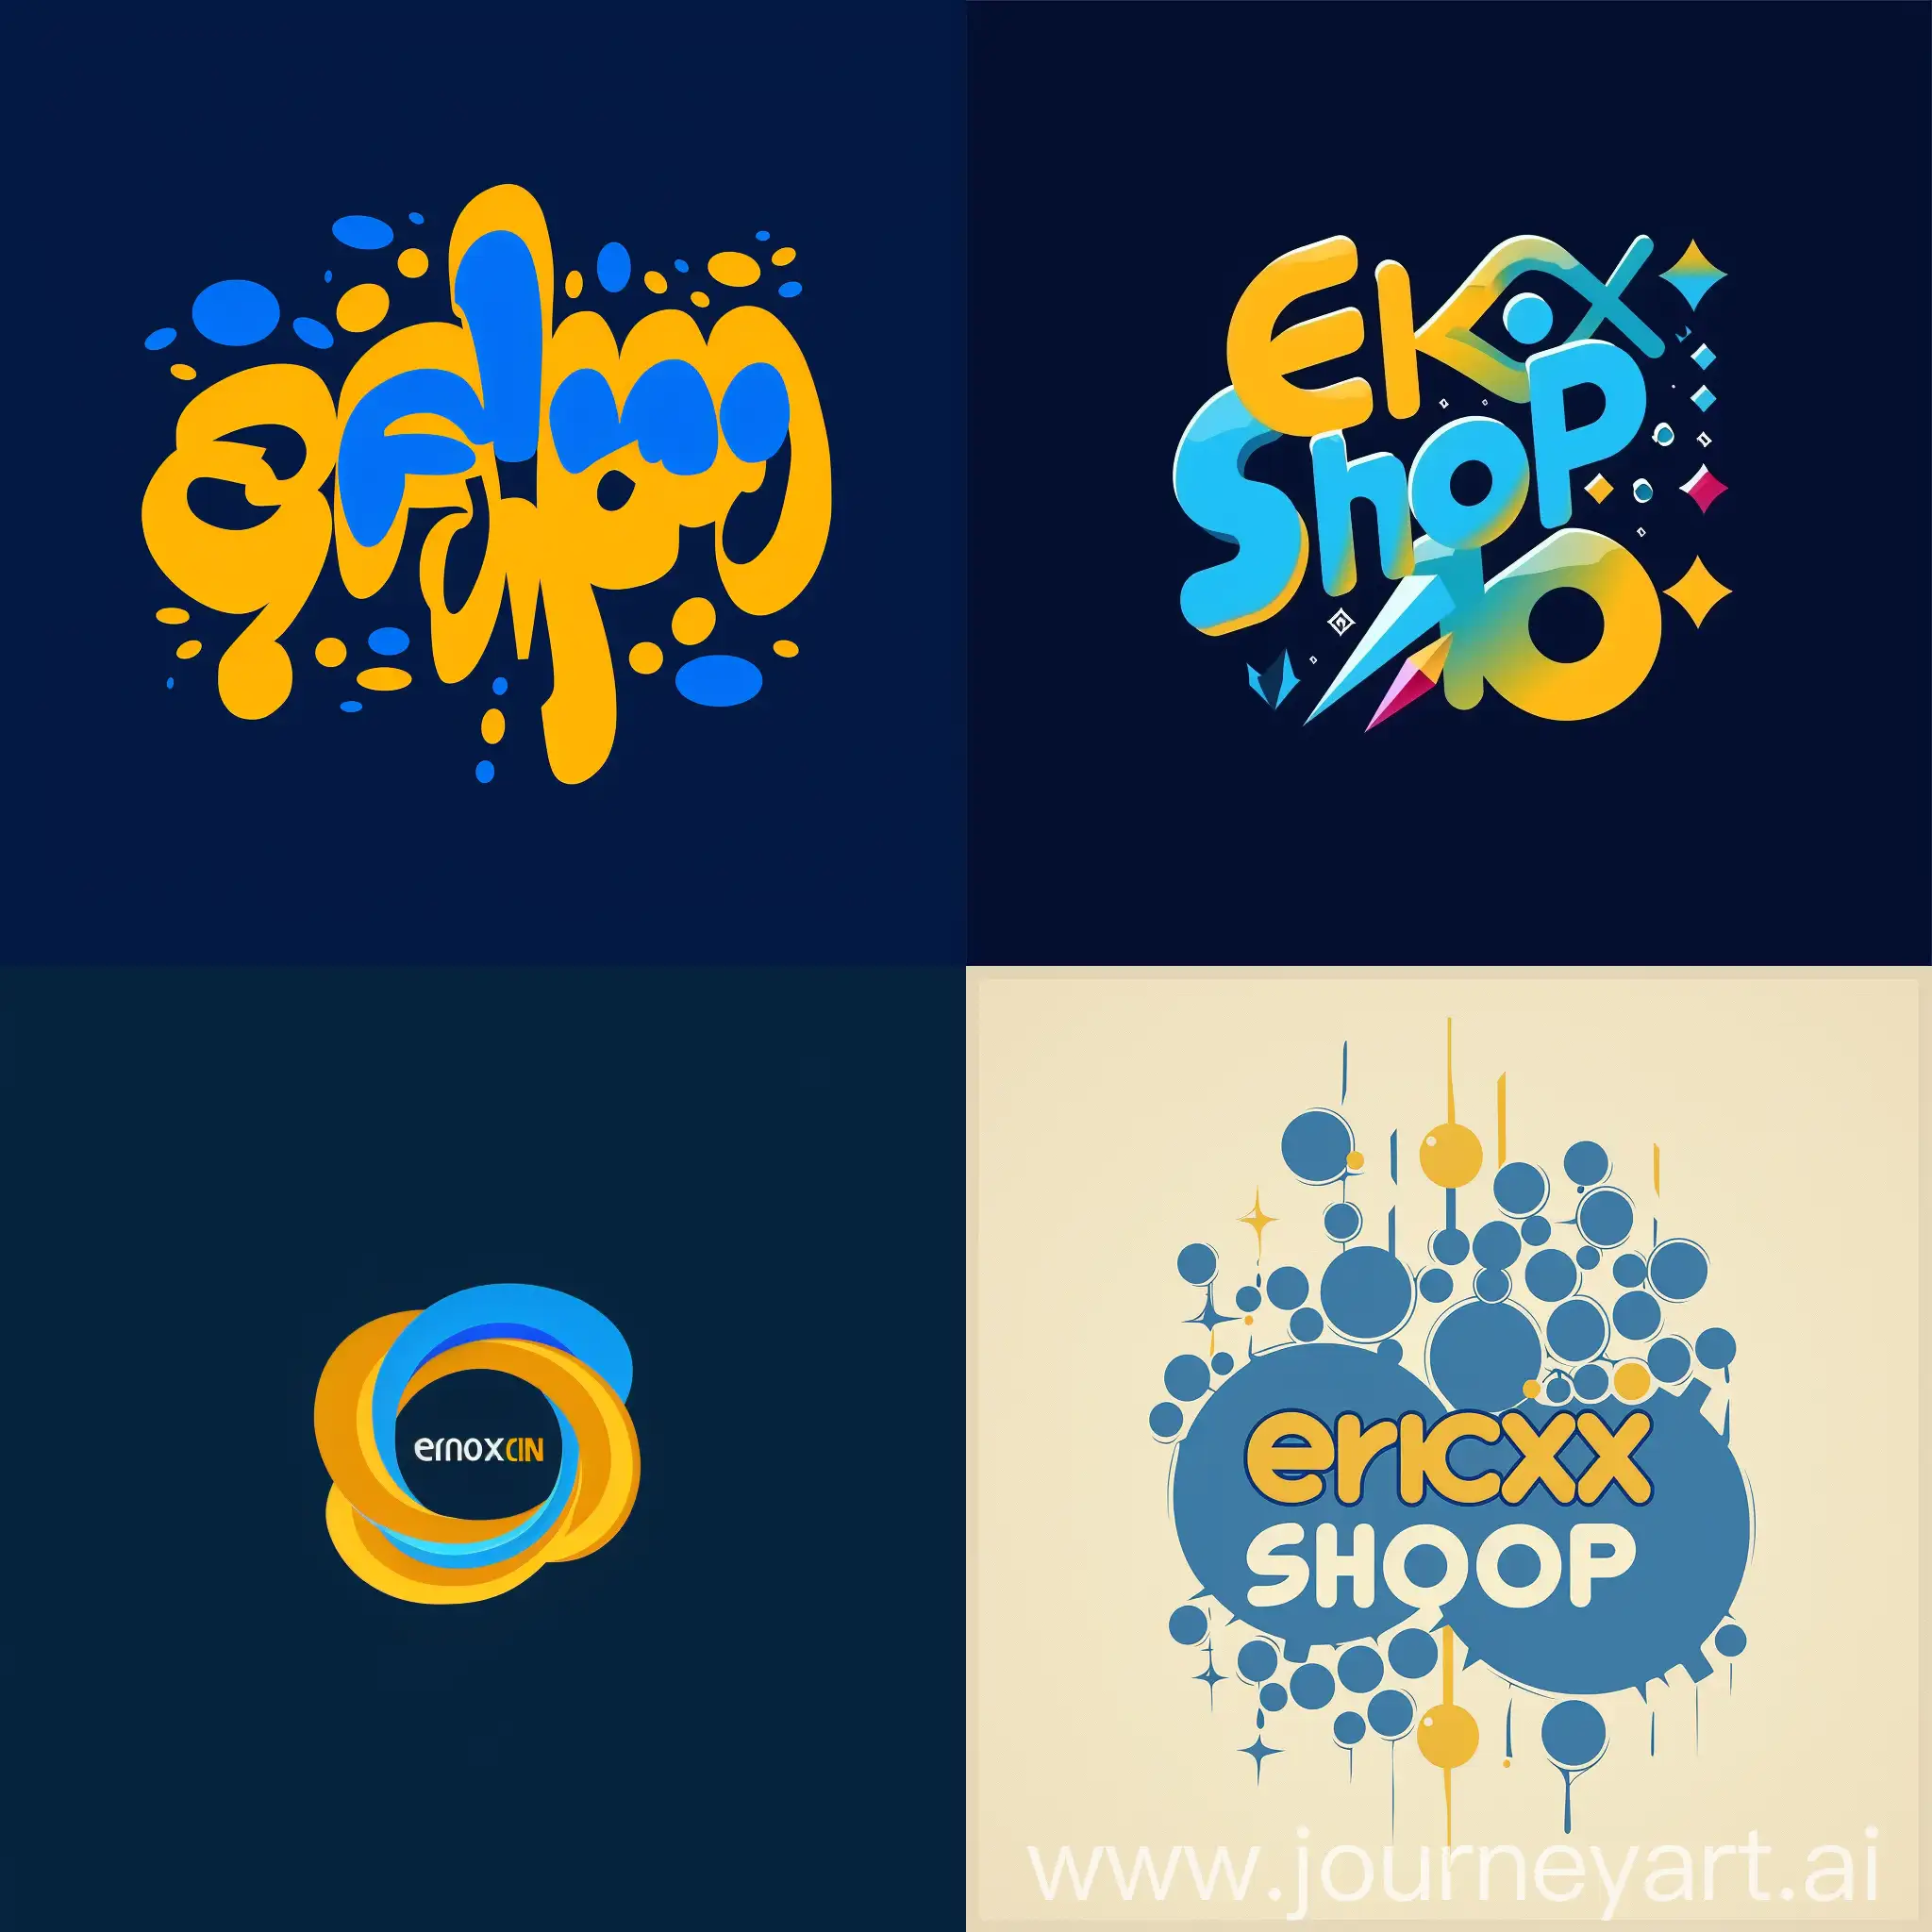 Eyecatching-Logos-for-Ernoxin-Shop-in-Blue-and-Yellow